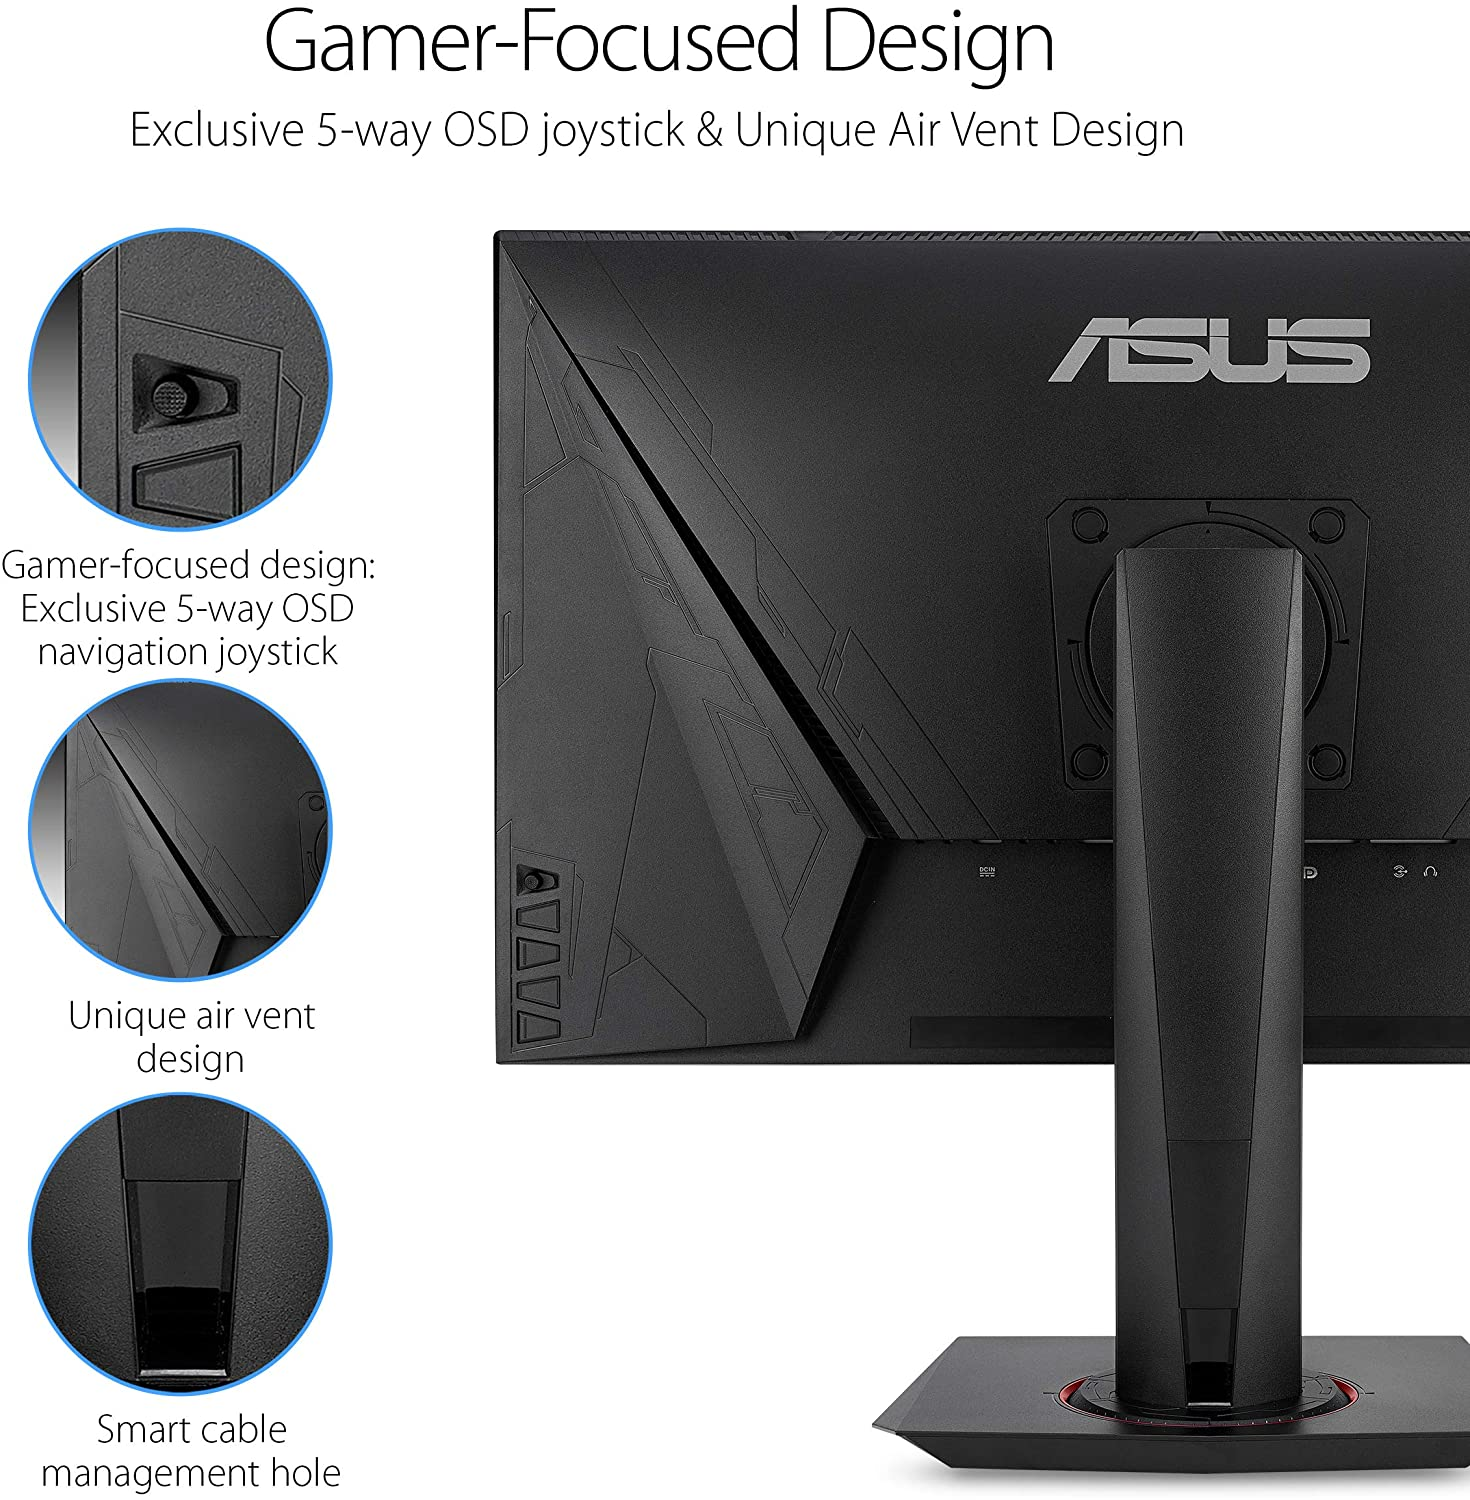 Asus VG278QR 27” Gaming Monitor, 1080P Full HD, 165Hz (Supports